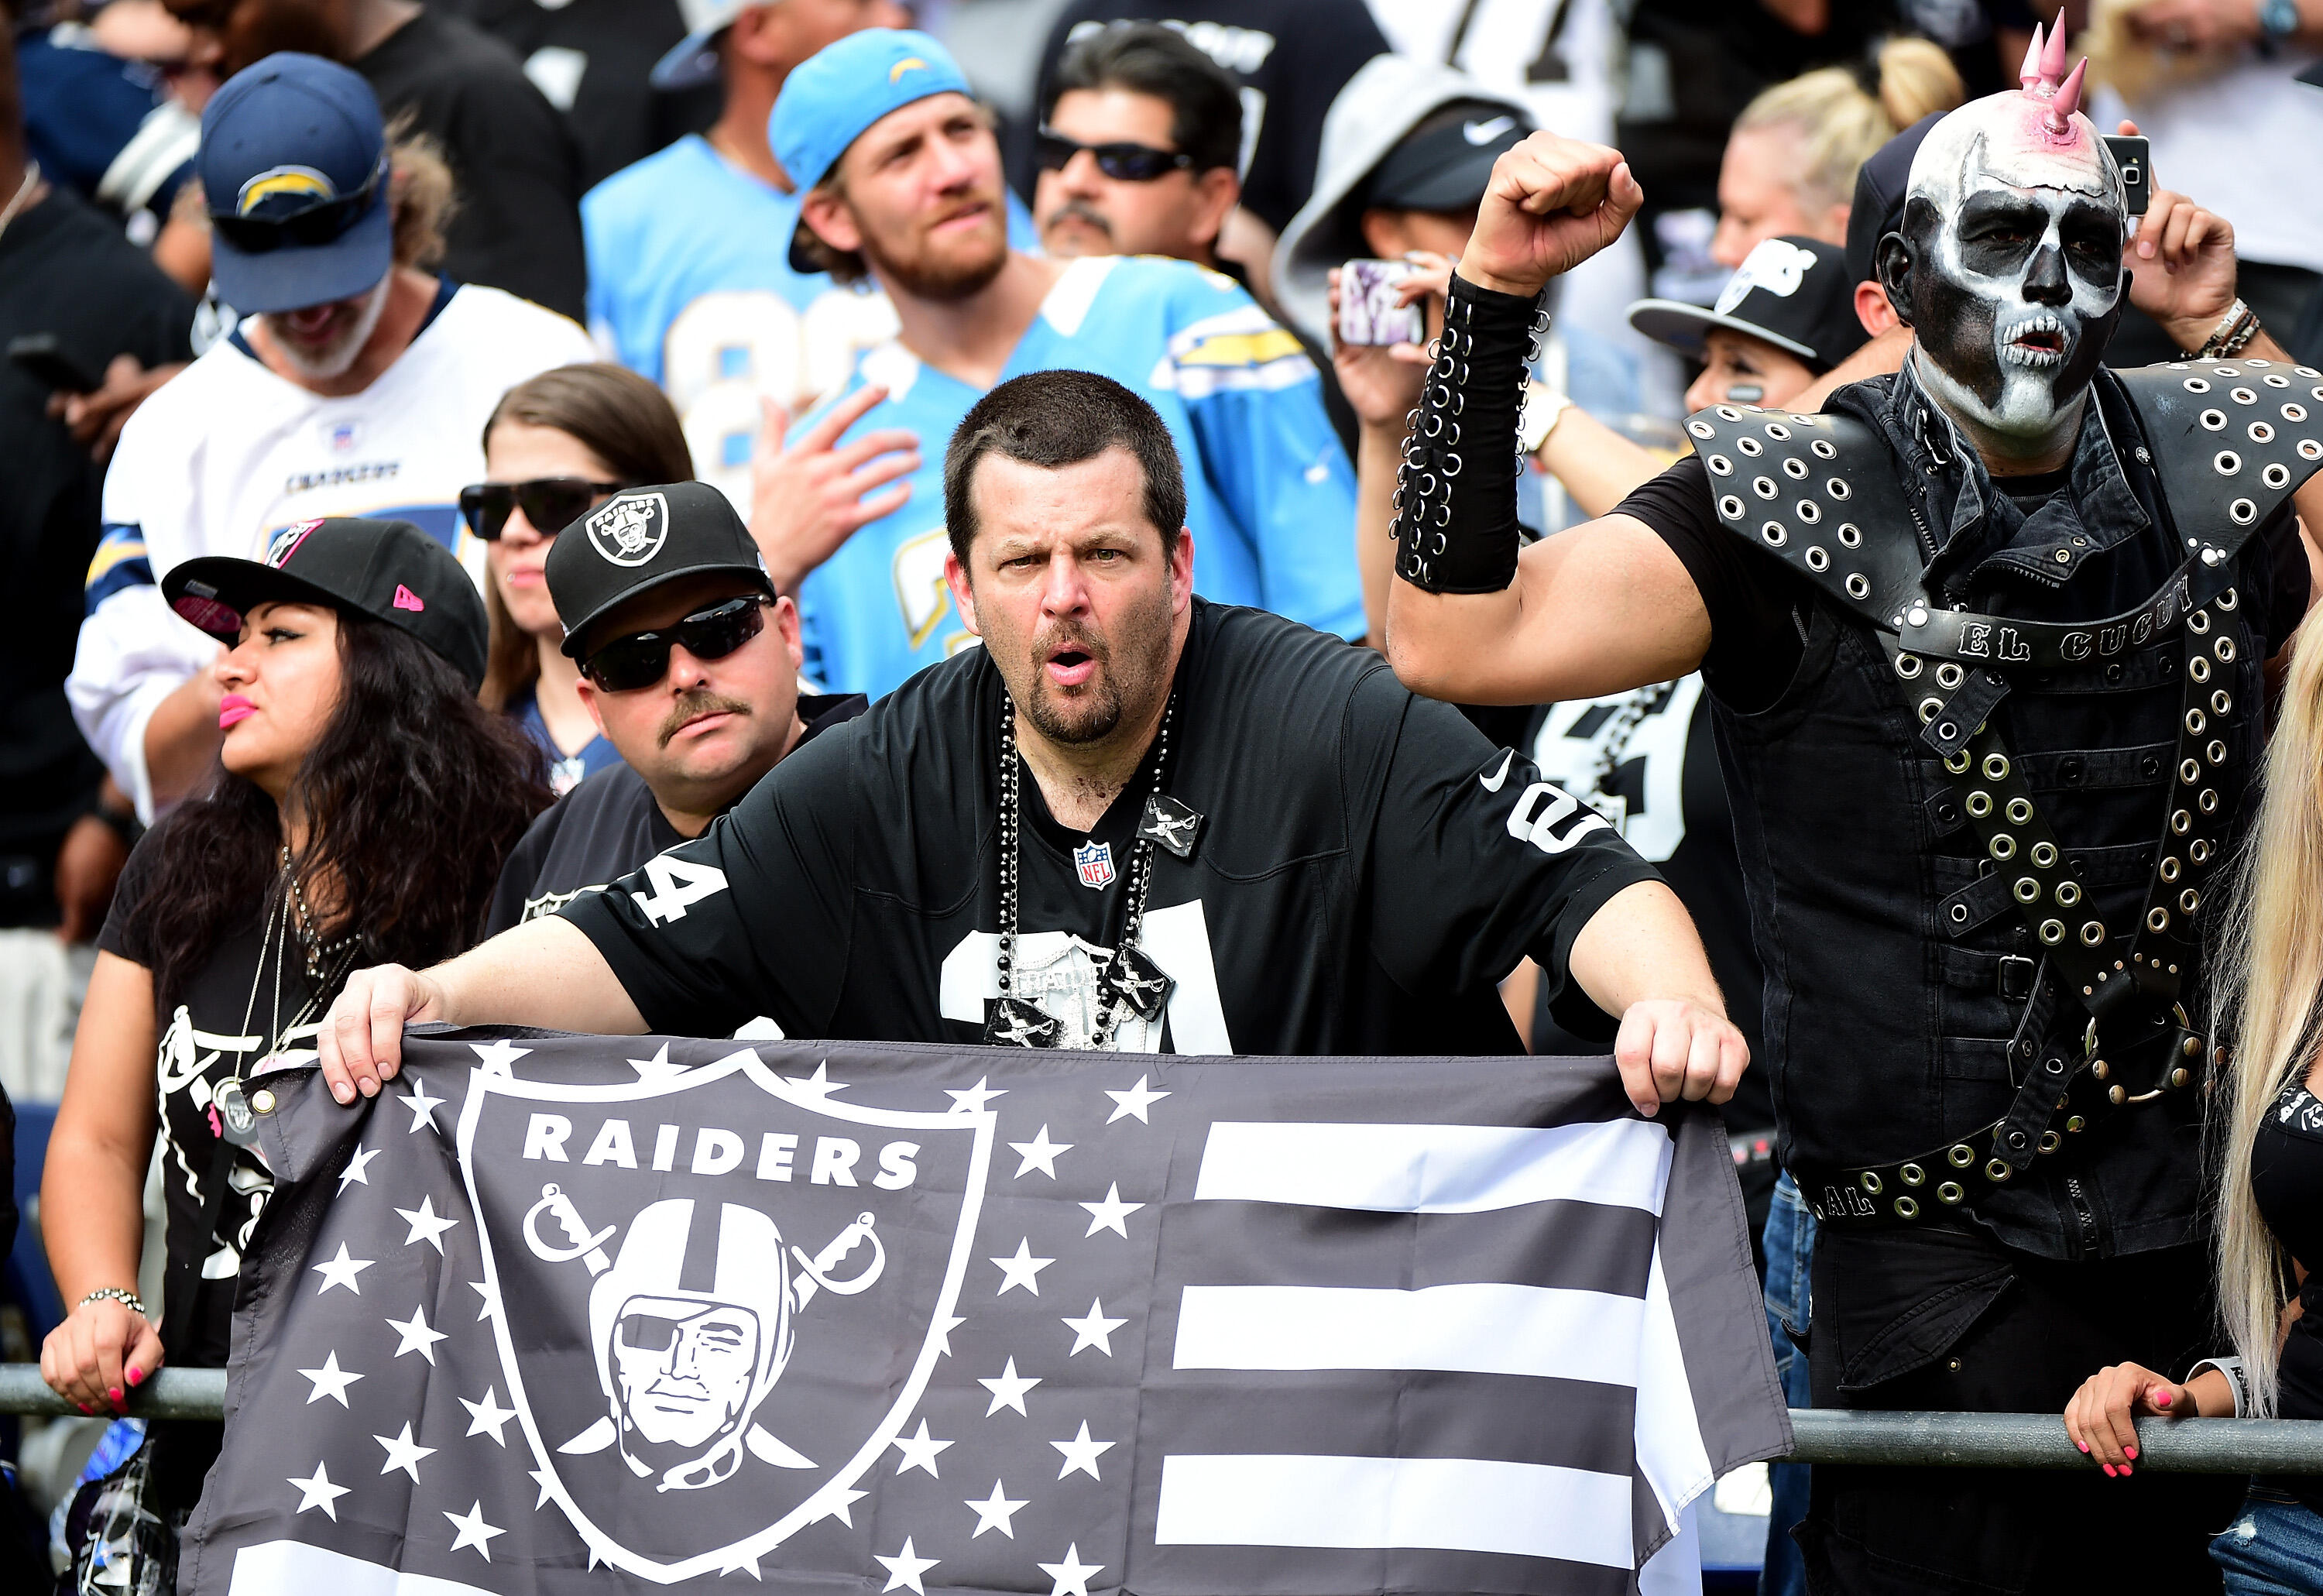 SAN DIEGO, CA - OCTOBER 25:  Oakland Raiders fans during the game against the San Diego Chargers at Qualcomm Stadium on October 25, 2015 in San Diego, California.  (Photo by Harry How/Getty Images)